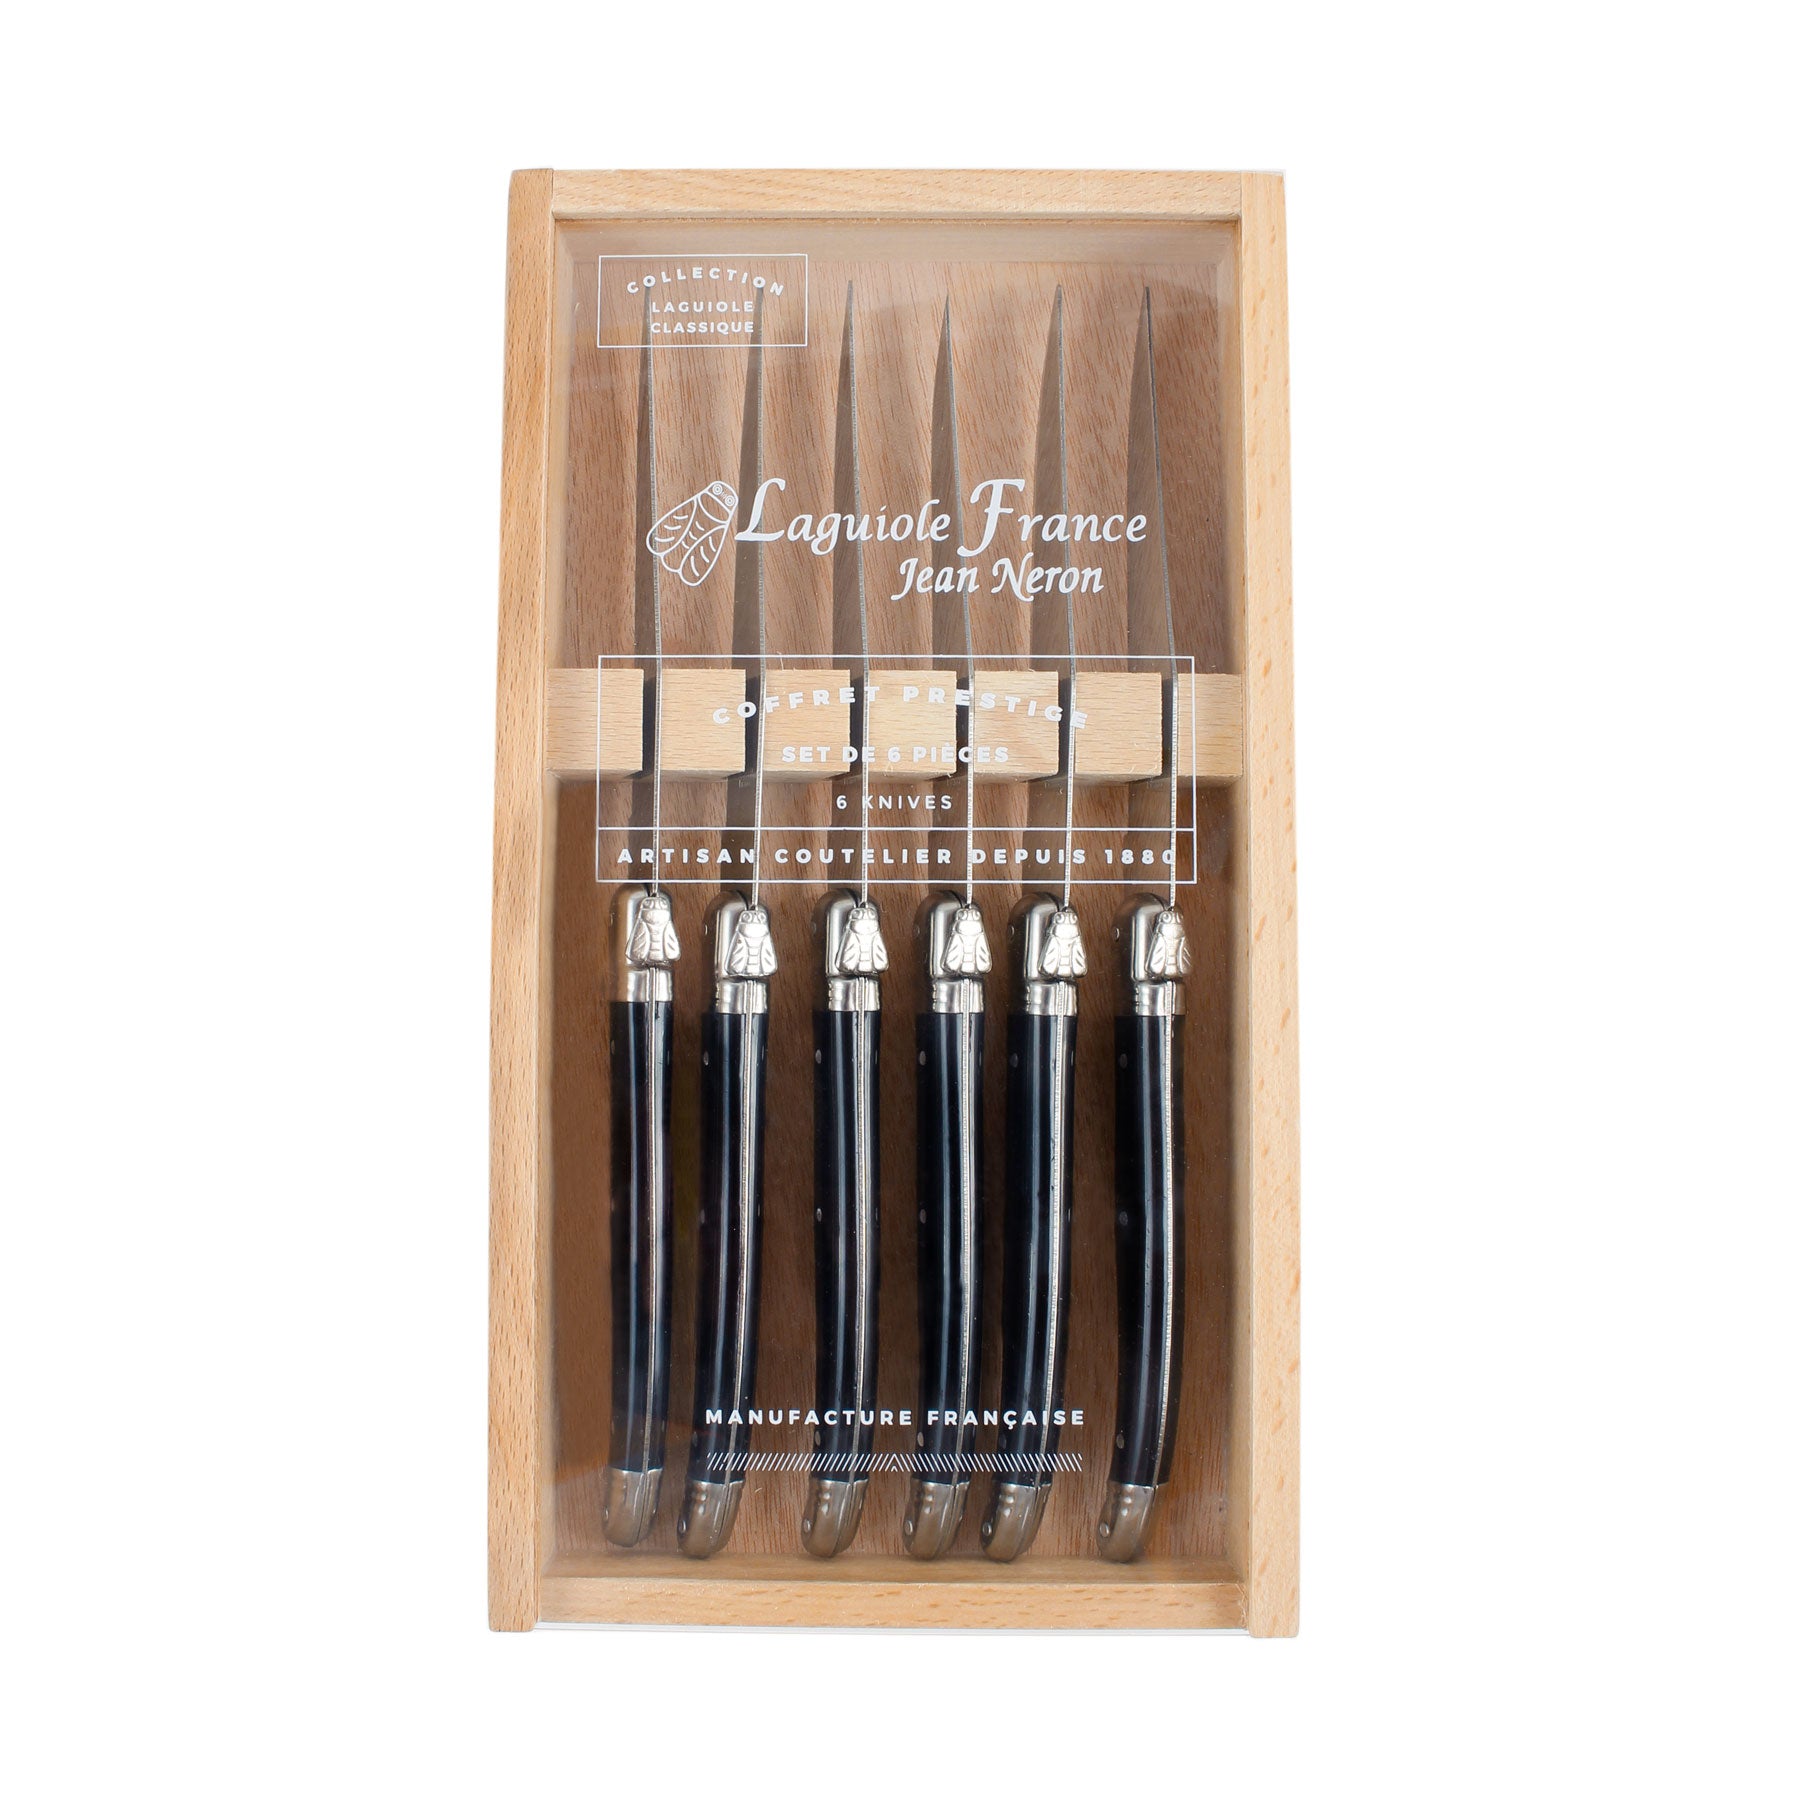 Laguiole Black Knives in Wooden Box with Acrylic Lid (Set of 6) Cutlery Laguiole Brand_Laguiole Kitchen_Dinnerware Kitchen_Kitchenware Knife Sets Laguiole Spring Collection 7900-60540M_BK_AL-Laguiole-Black-Knives-in-Wooden-Box-with-Acrylic-Lid-_Set-of-6__Web_edit